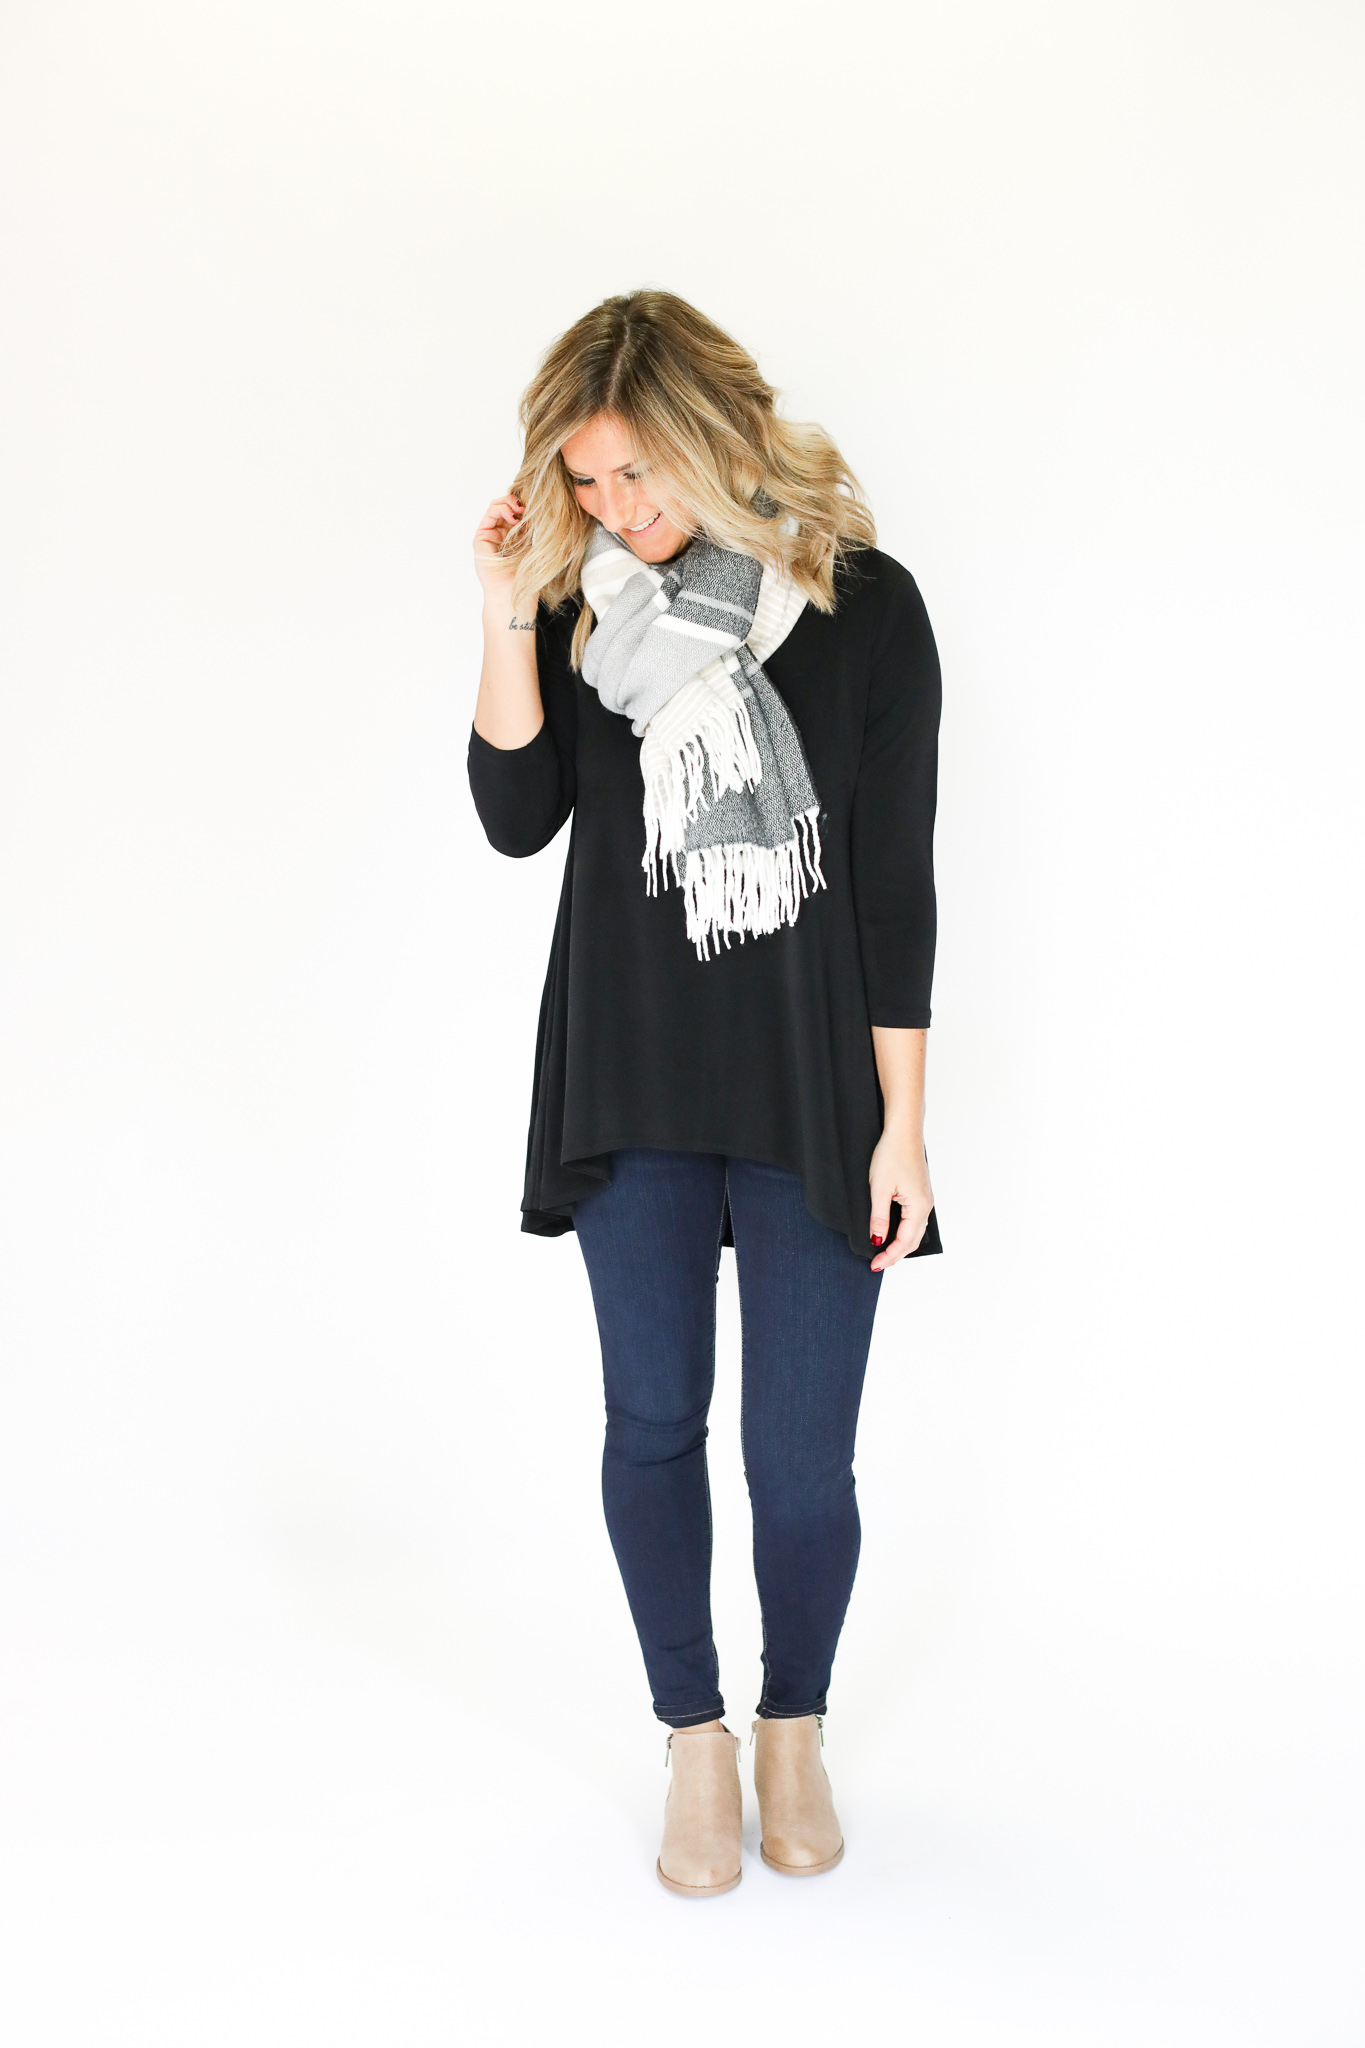 6 Ways to Wear a Scarf with Your Favorite Fall Outfits - BonBon Break